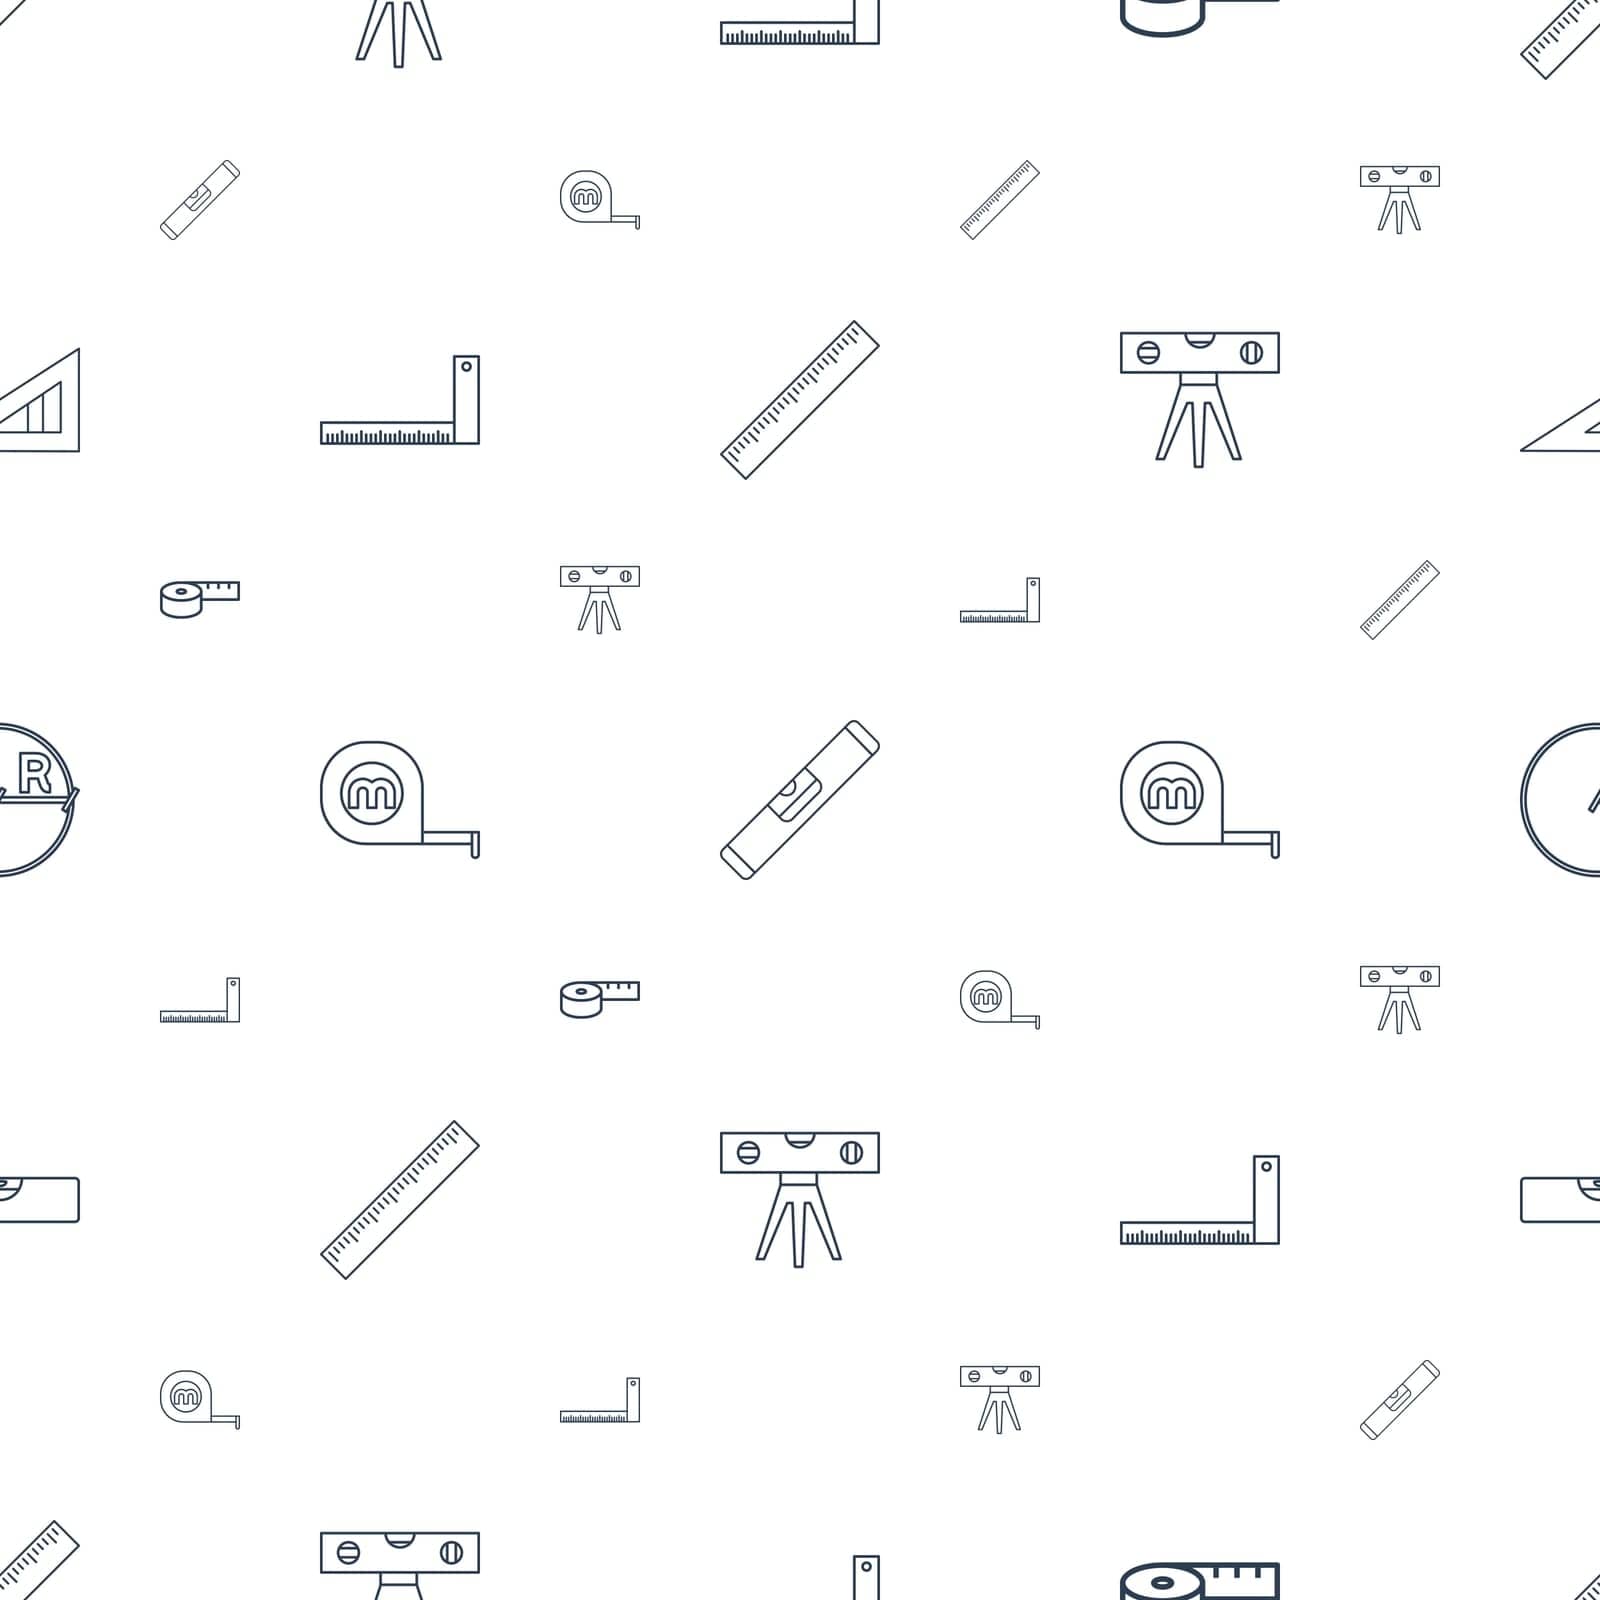 symbol,repair,measuring,education,line,concept,pattern,icon,sign,isolated,simple,instrument,industry,ruler,triangle,measurement,horizontal,white,tape,balance,school,web,design,drawing,construction,vector,element,level,work,length,equipment,tool,measure,background,geometric,illustration,circle,object